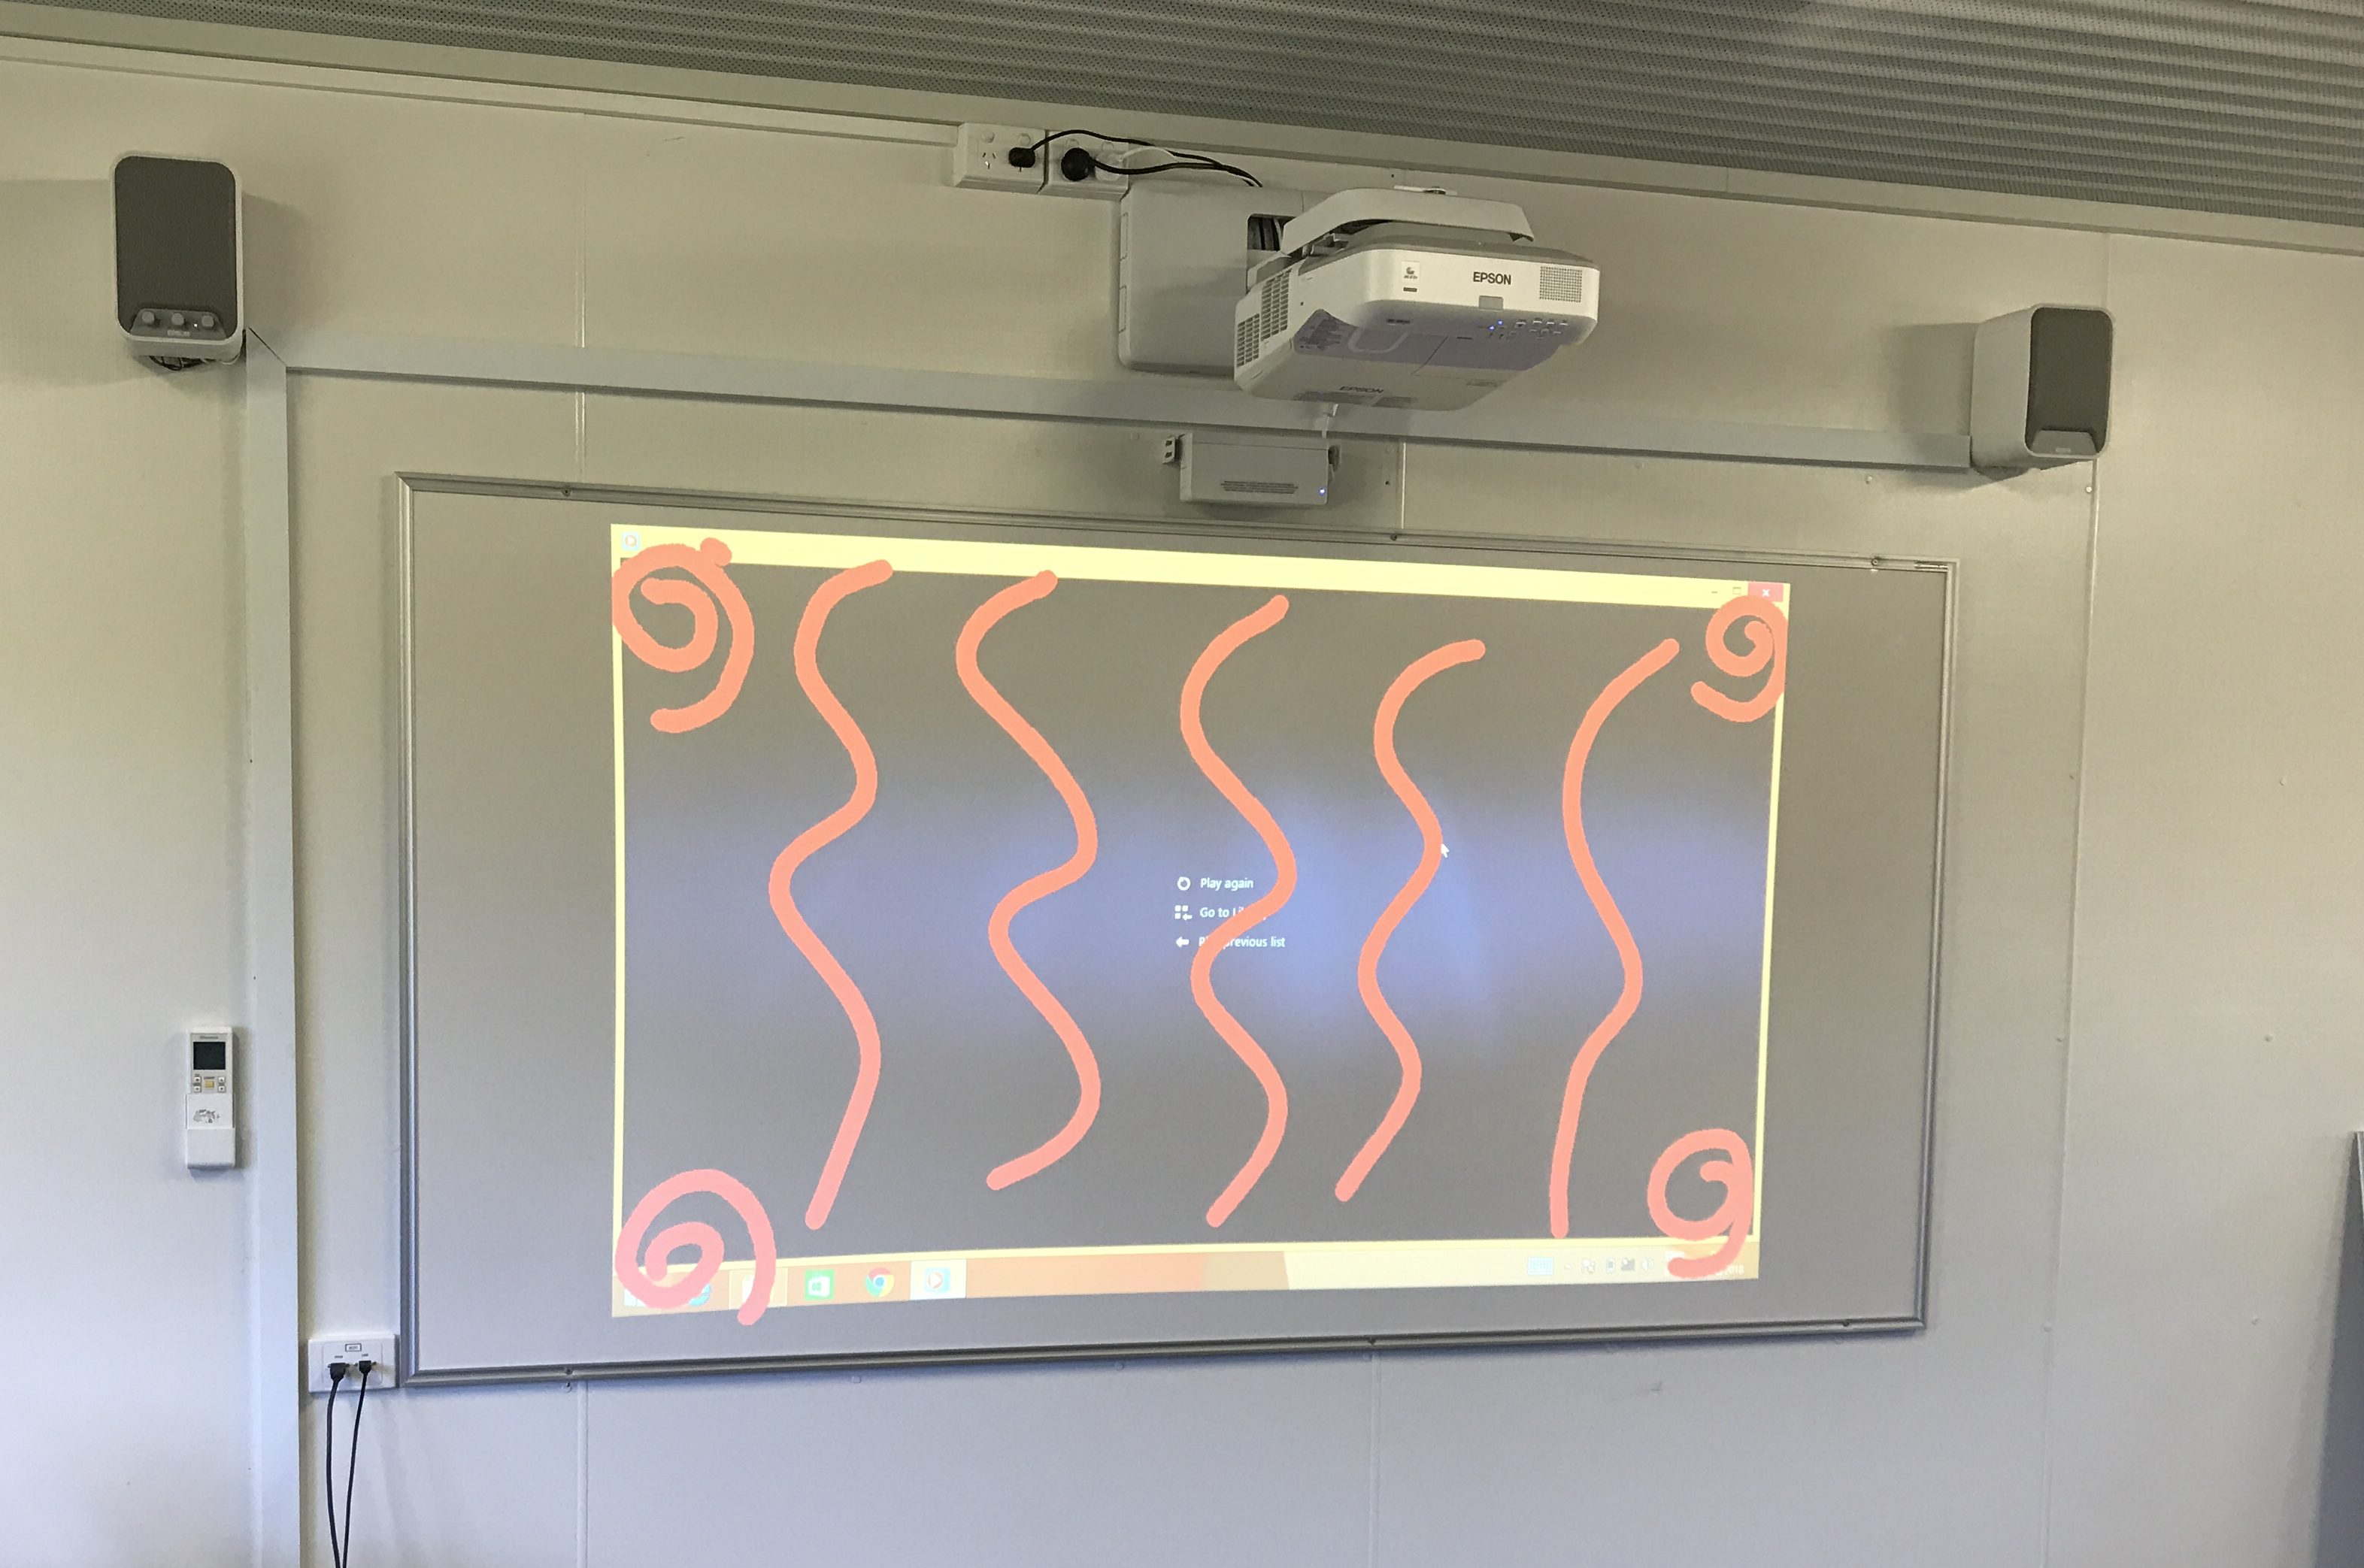 EPSON EB-695Wi Interactive Finger Touch Projector at Cornish College